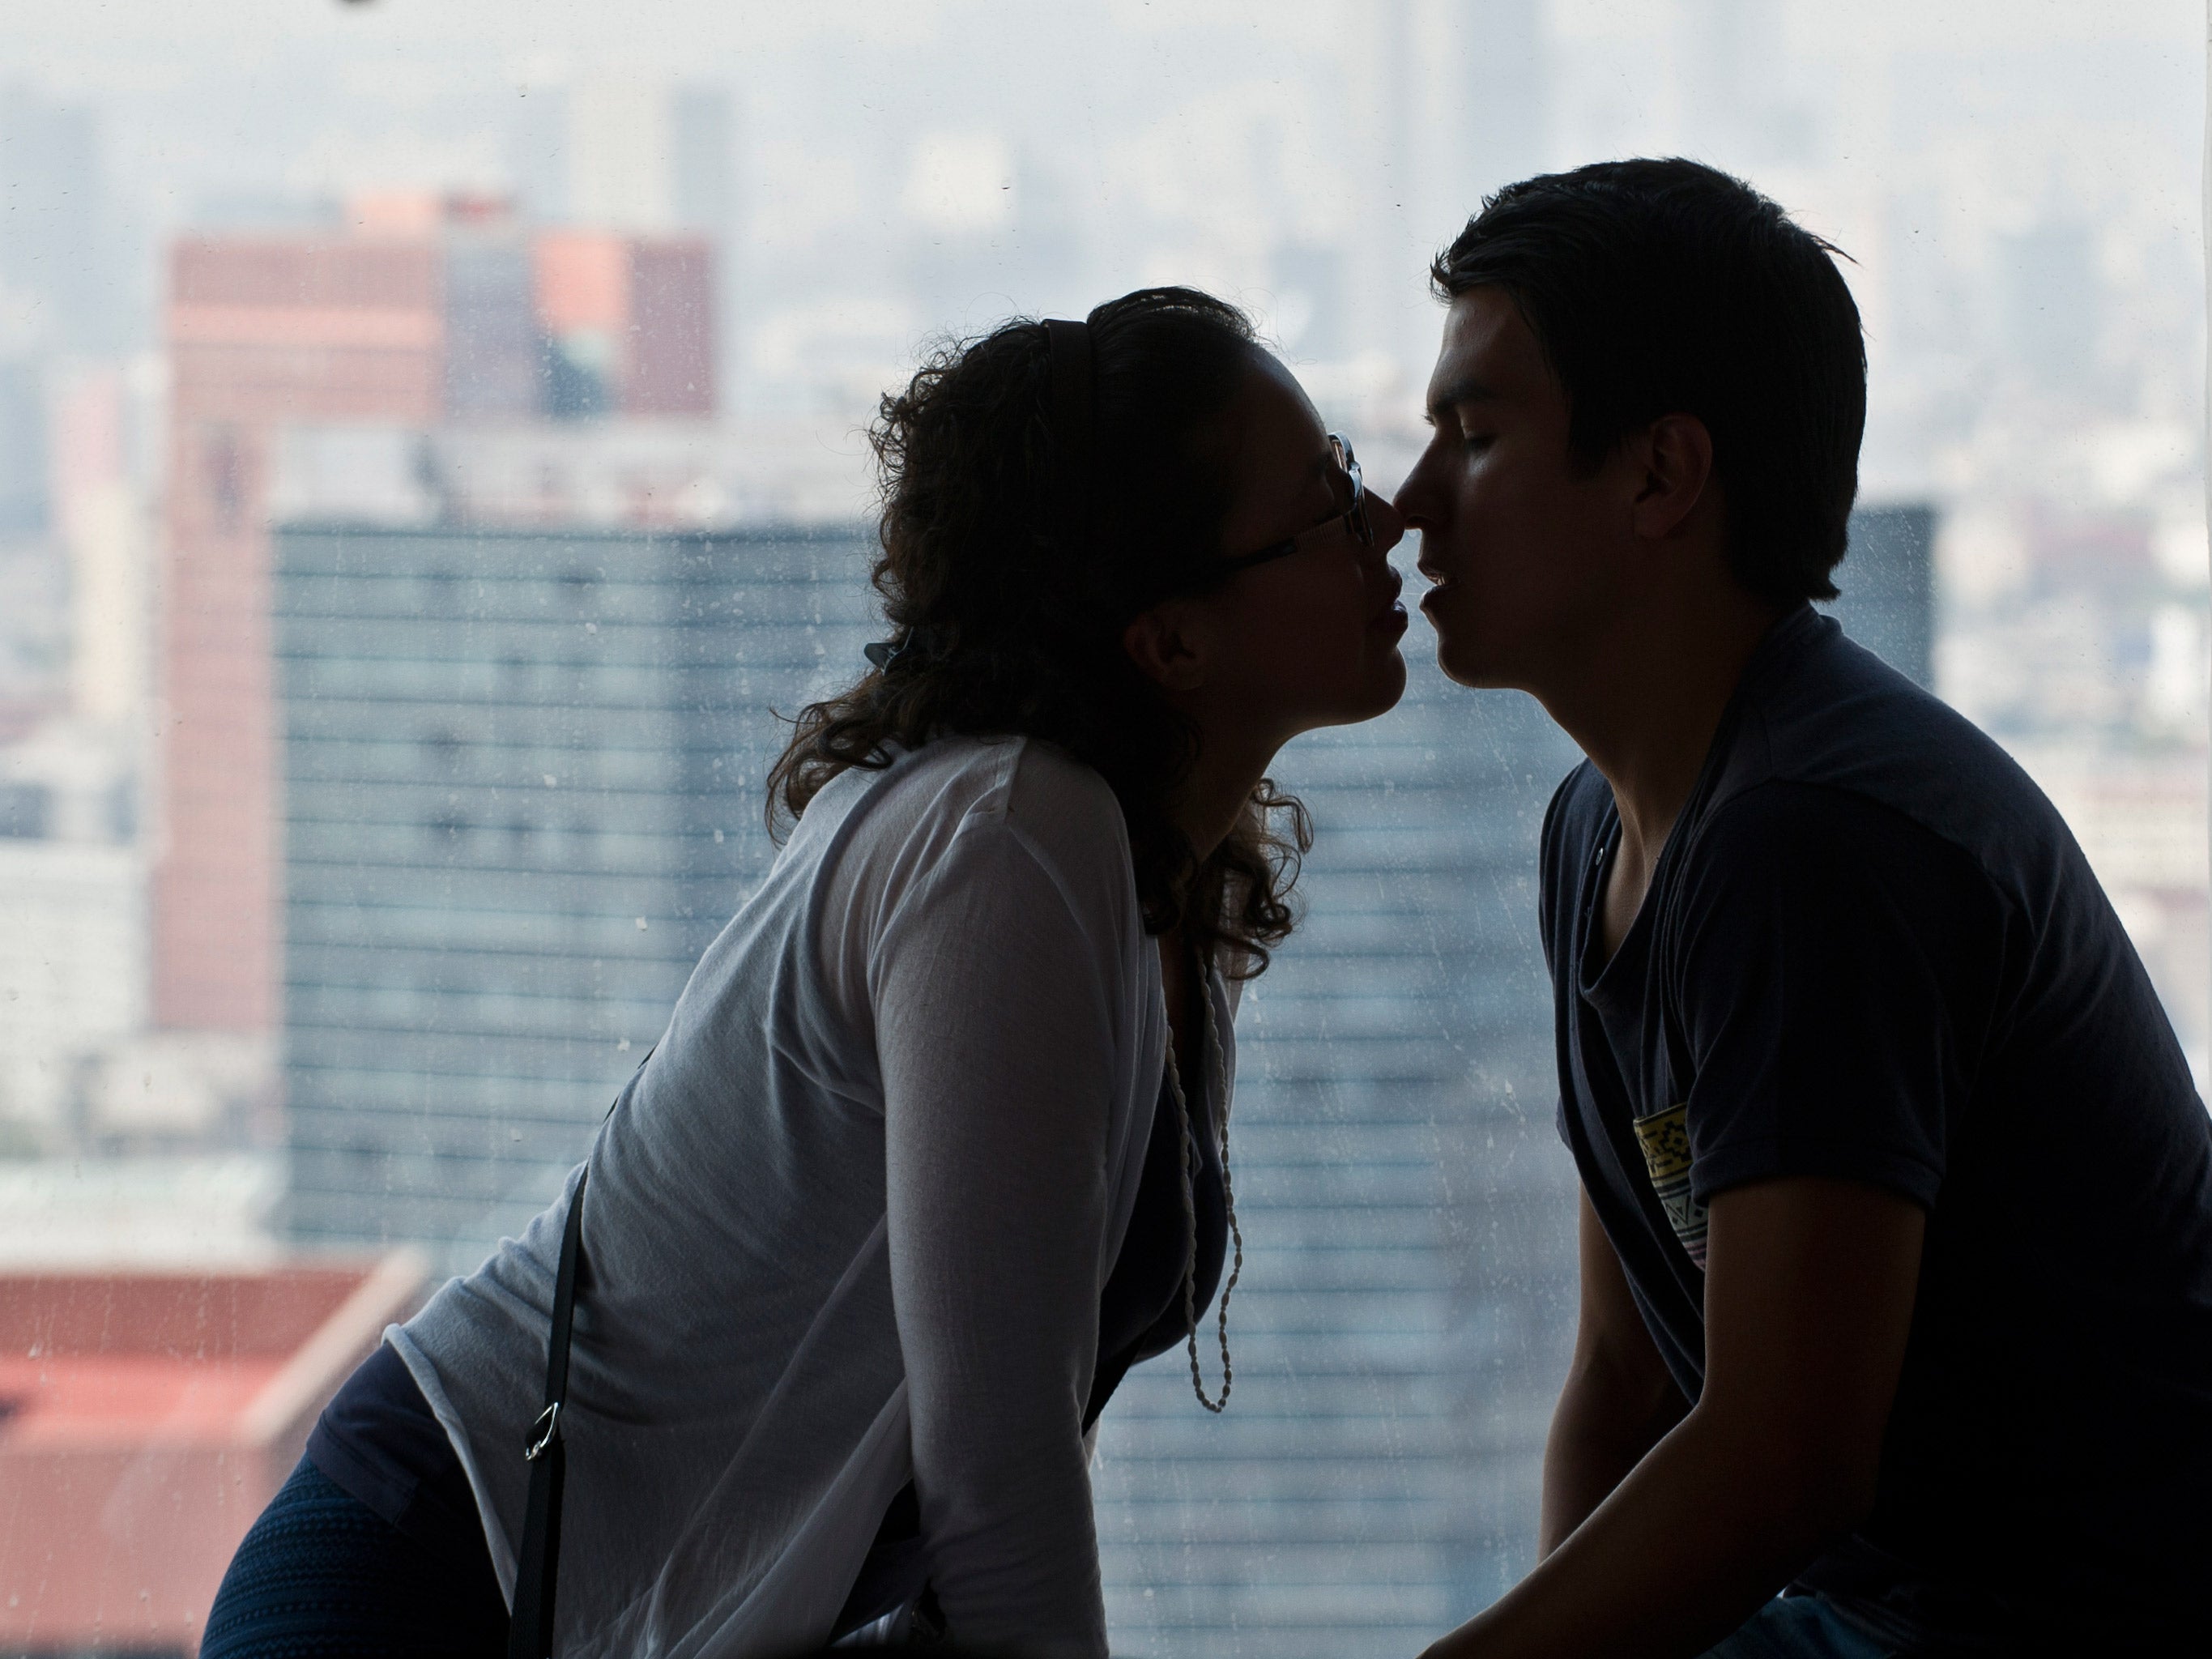 New research shows romantic kissing is far from universal